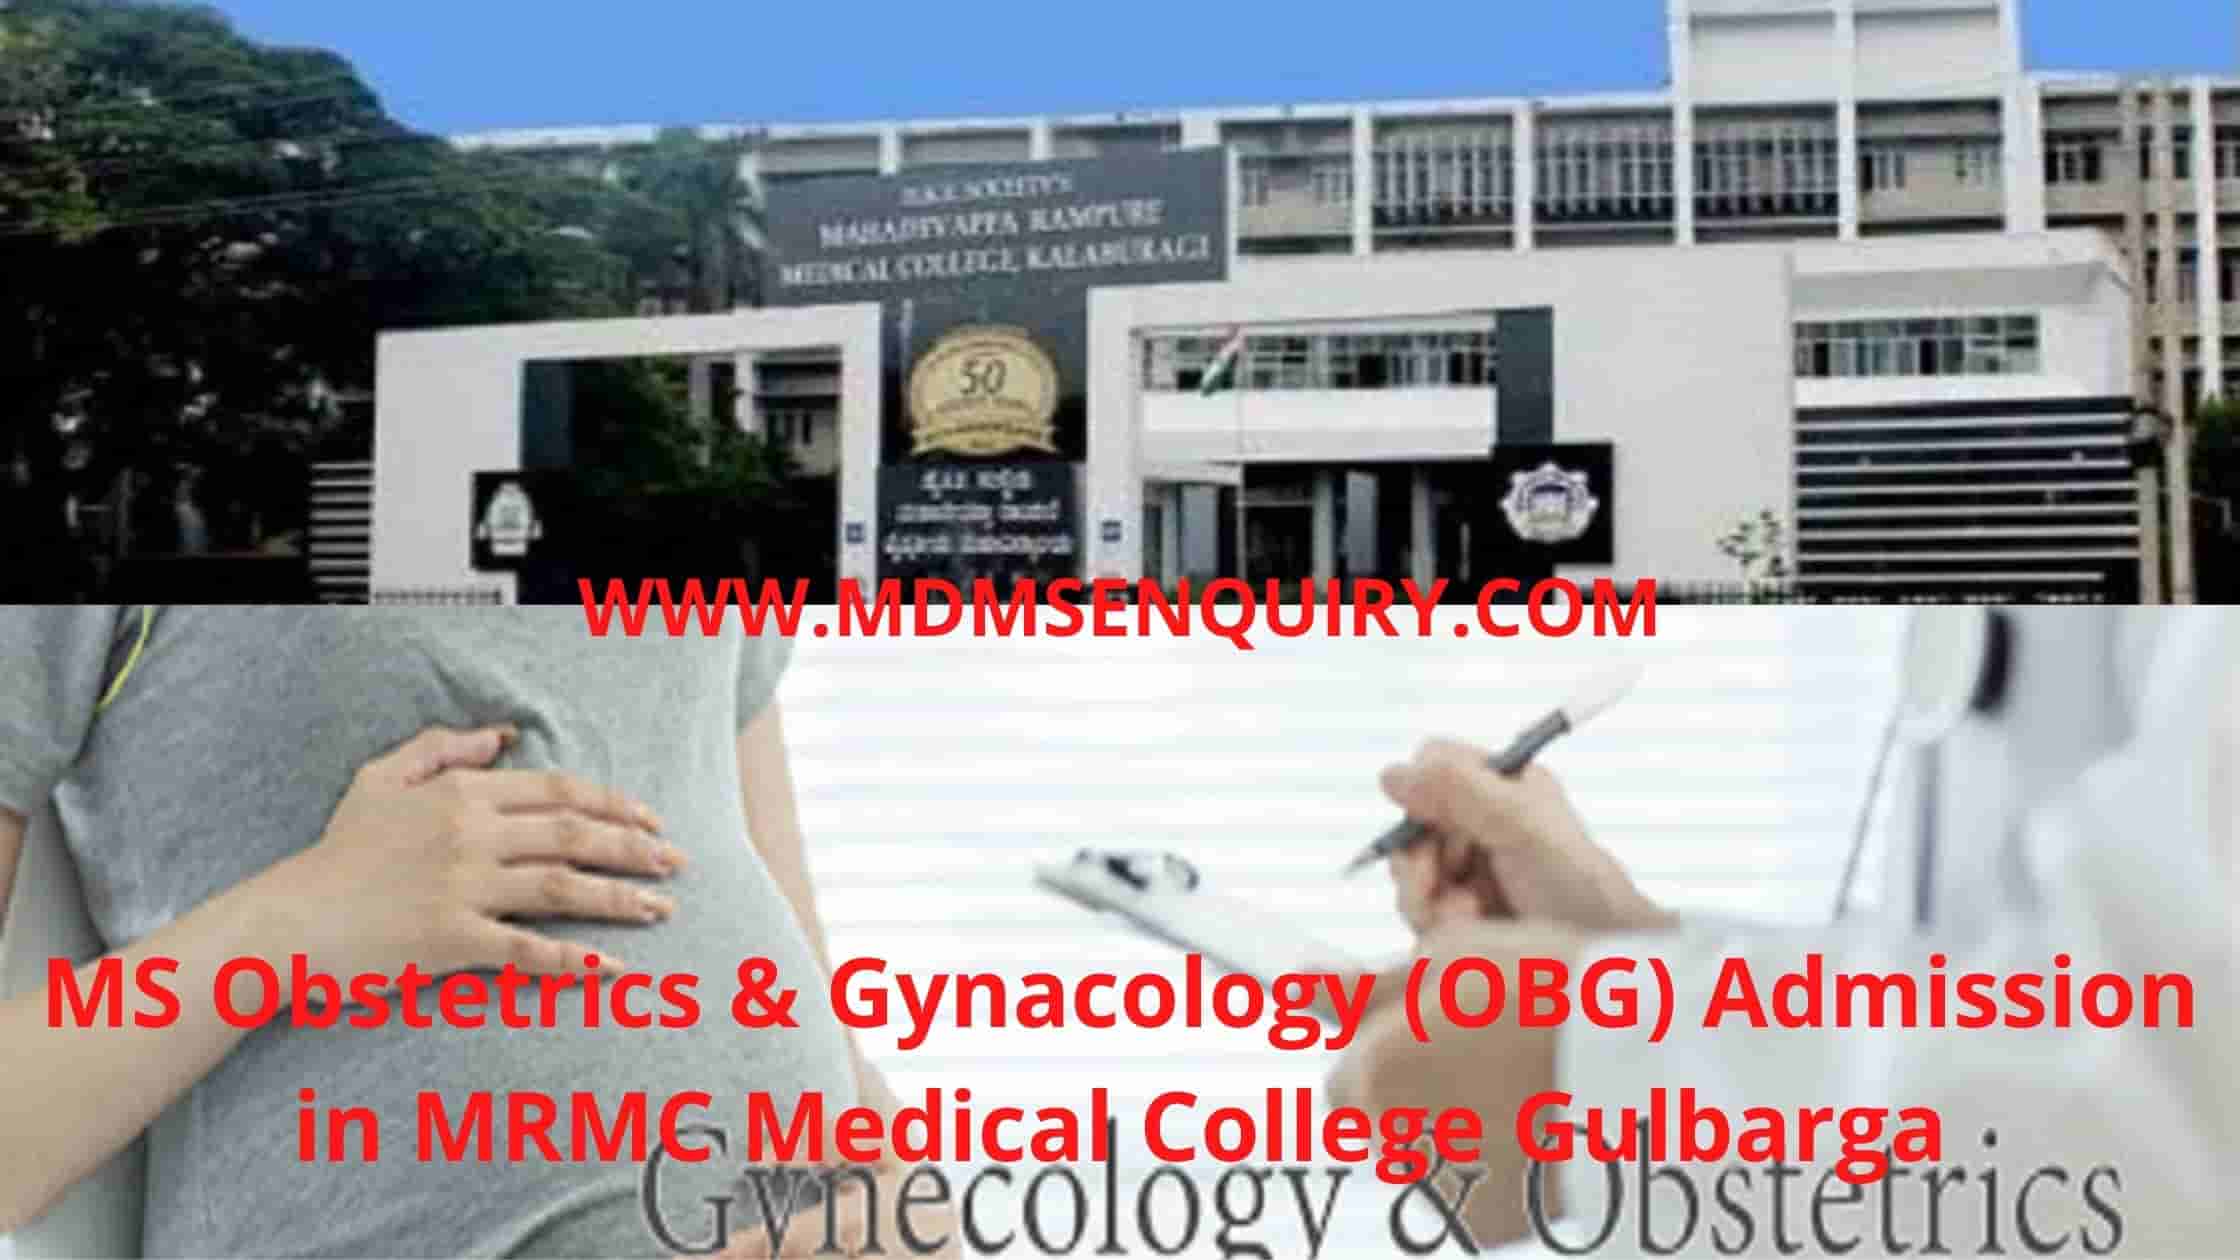 MS Obstetrics & Gynacology (OBG) admission in MRMC Medical College Gulbarga